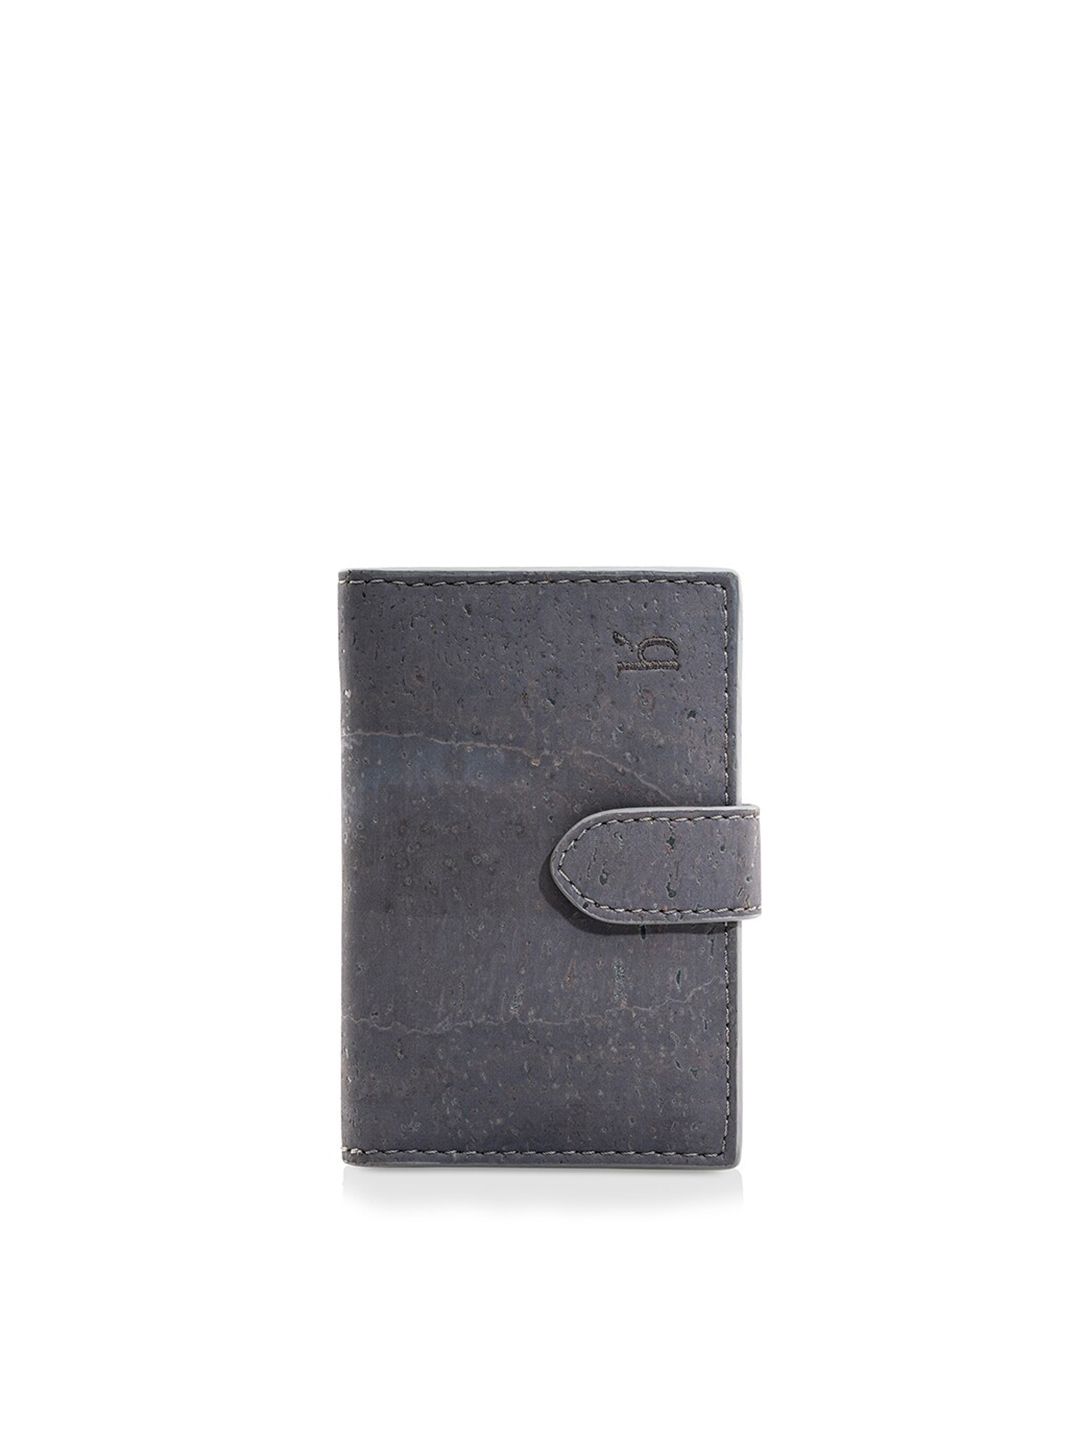 Beej Unisex Charcoal Textured Two Fold Wallet Price in India